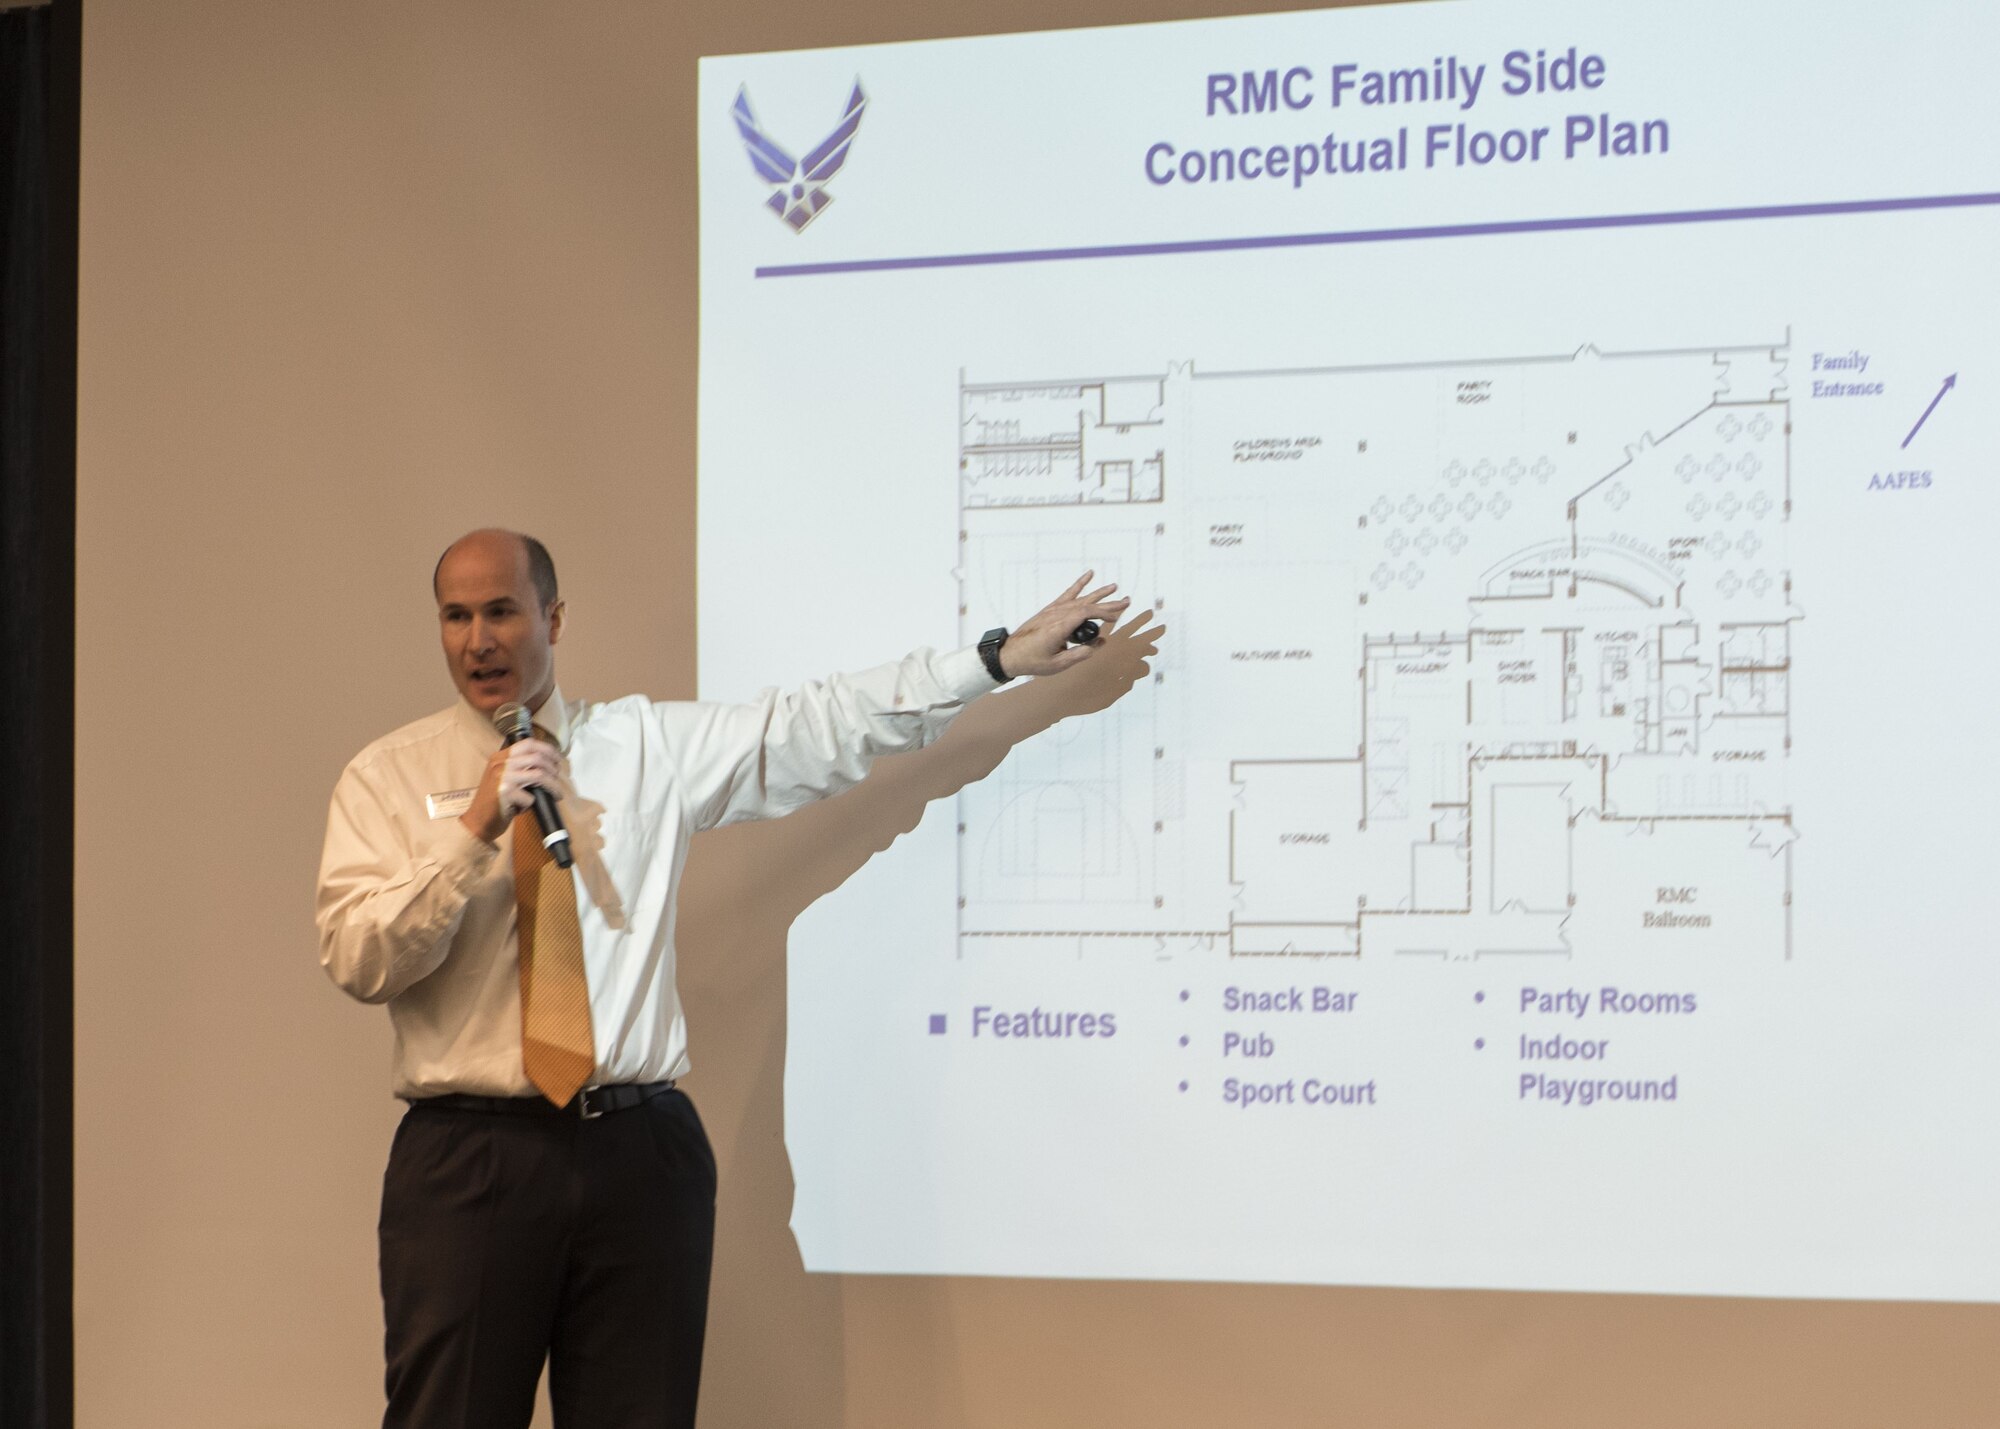 Mr. Ben Furqueron, 92nd Force Support Squadron deputy commander, describes the upcoming renovations to the Red Morgan Center at Fairchild Air Force Base, Washington, Nov. 29, 2017. The former base recreation center known as the "Fun Spot" closed down earlier this year due to structural problems, so a hybrid facility was conceived to combine the RMC with a place for base members to relax and have fun. (U.S. Air Force photo/Senior Airman Ryan Lackey)